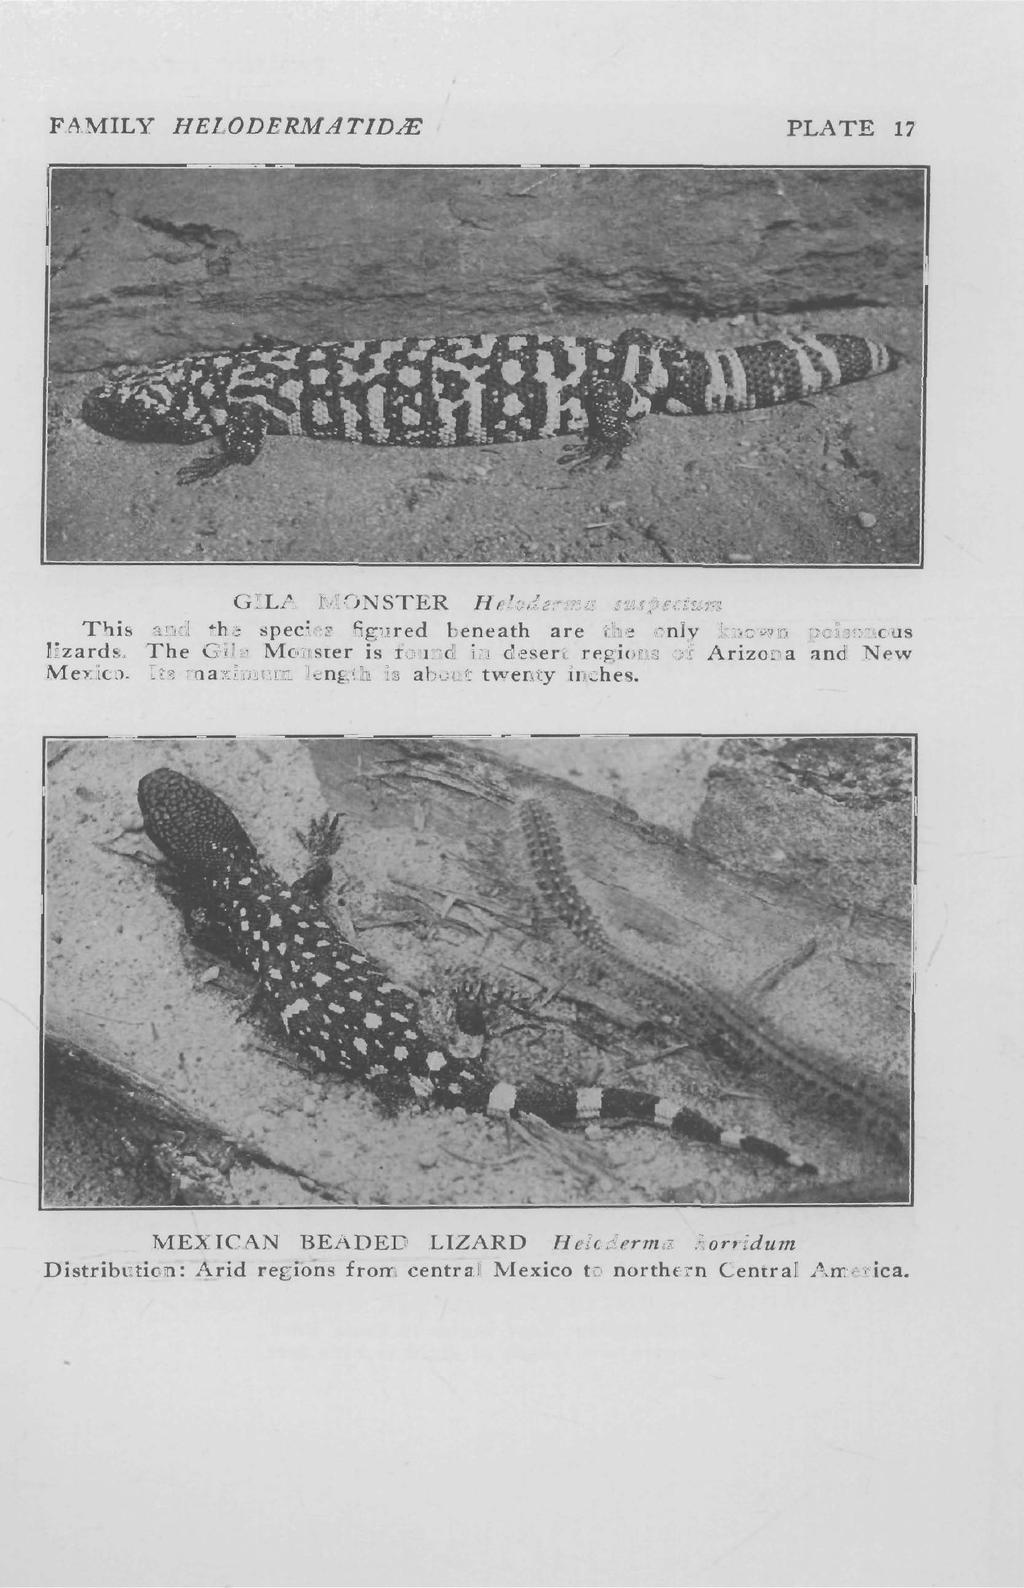 FAMILY HELODERMATID.lE PLATE 17 GILA MONSTER Heloderma suspectum This and the species figured beneath are the only known poisonous lizards.